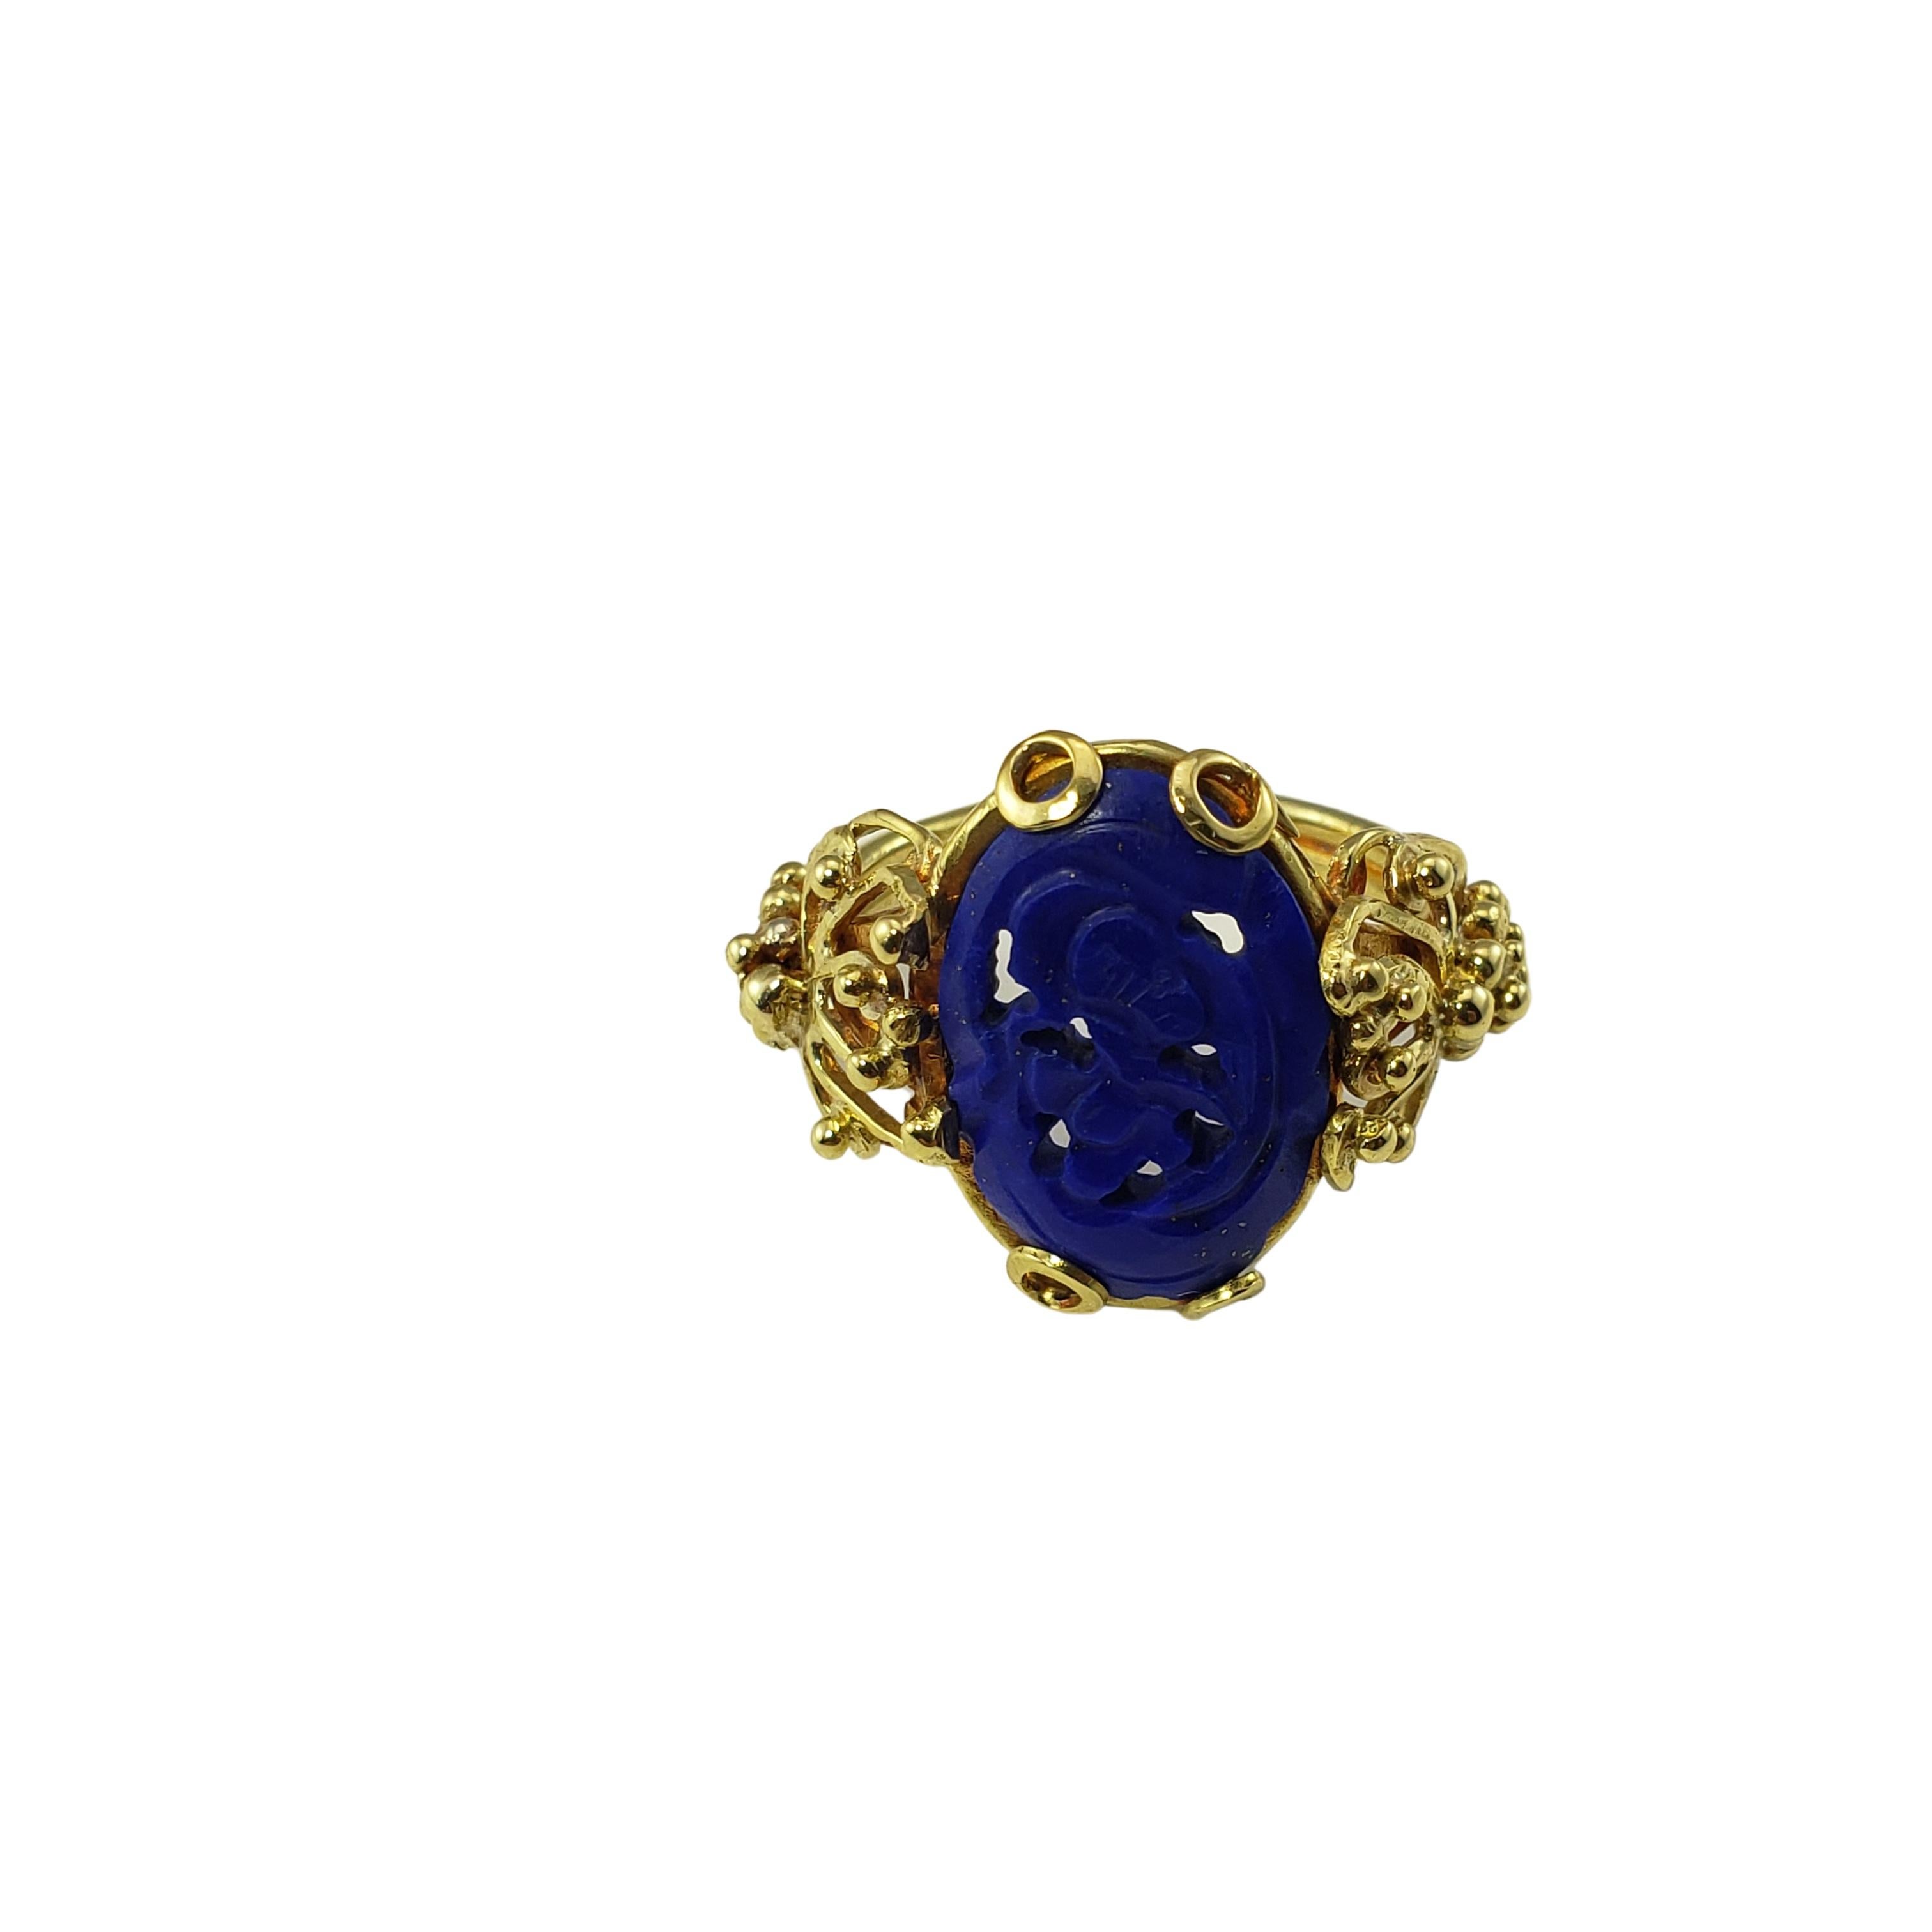 Vintage 18 Karat Yellow Gold Carved Lapis Lazuli Ring Size 7-

This lovely ring features one carved lapis lazuli stone (16 mm x 12 mm) set in beautifully detailed 18K yellow gold. Shank: 2.5 mm.

Ring Size: 7

Weight: 4.1 dwt. / 6.4 gr.

Tested 18K